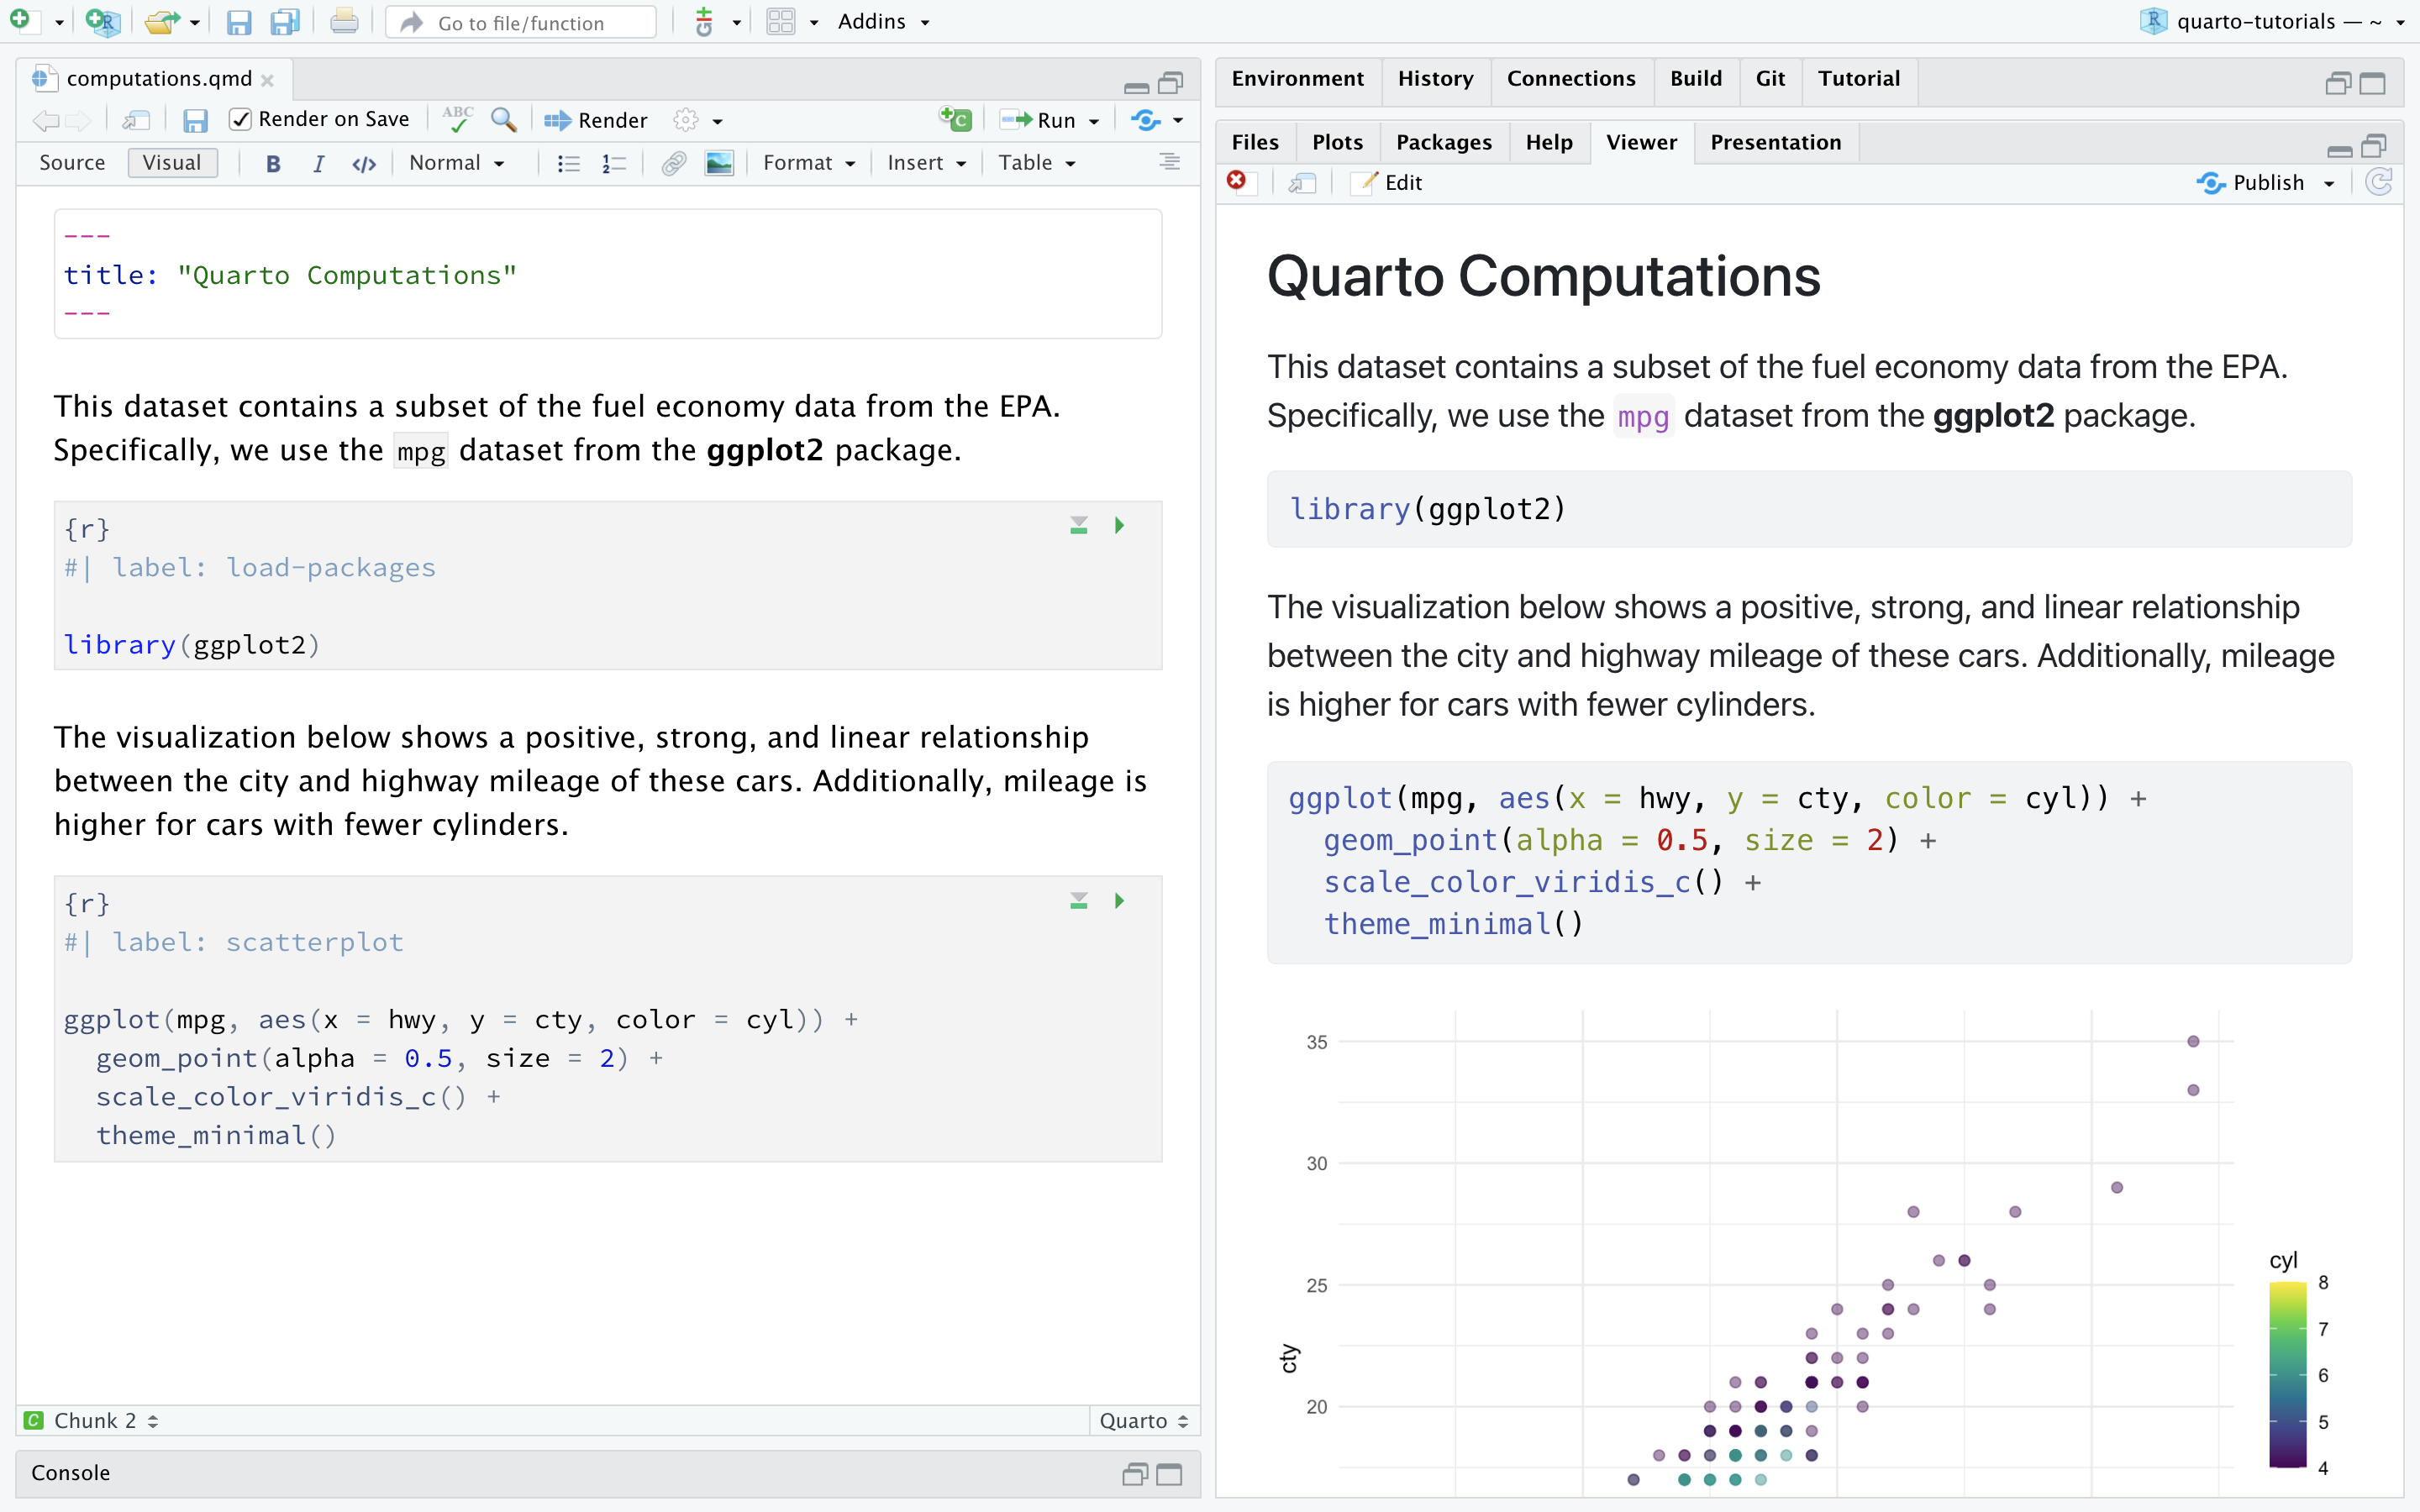 RStudio window with computations.qmd open in the visual editor (on the right) and the rendered document (on the left). The document is titled Quarto Computations and contains some text and code. The rendered version also shows a visualization.